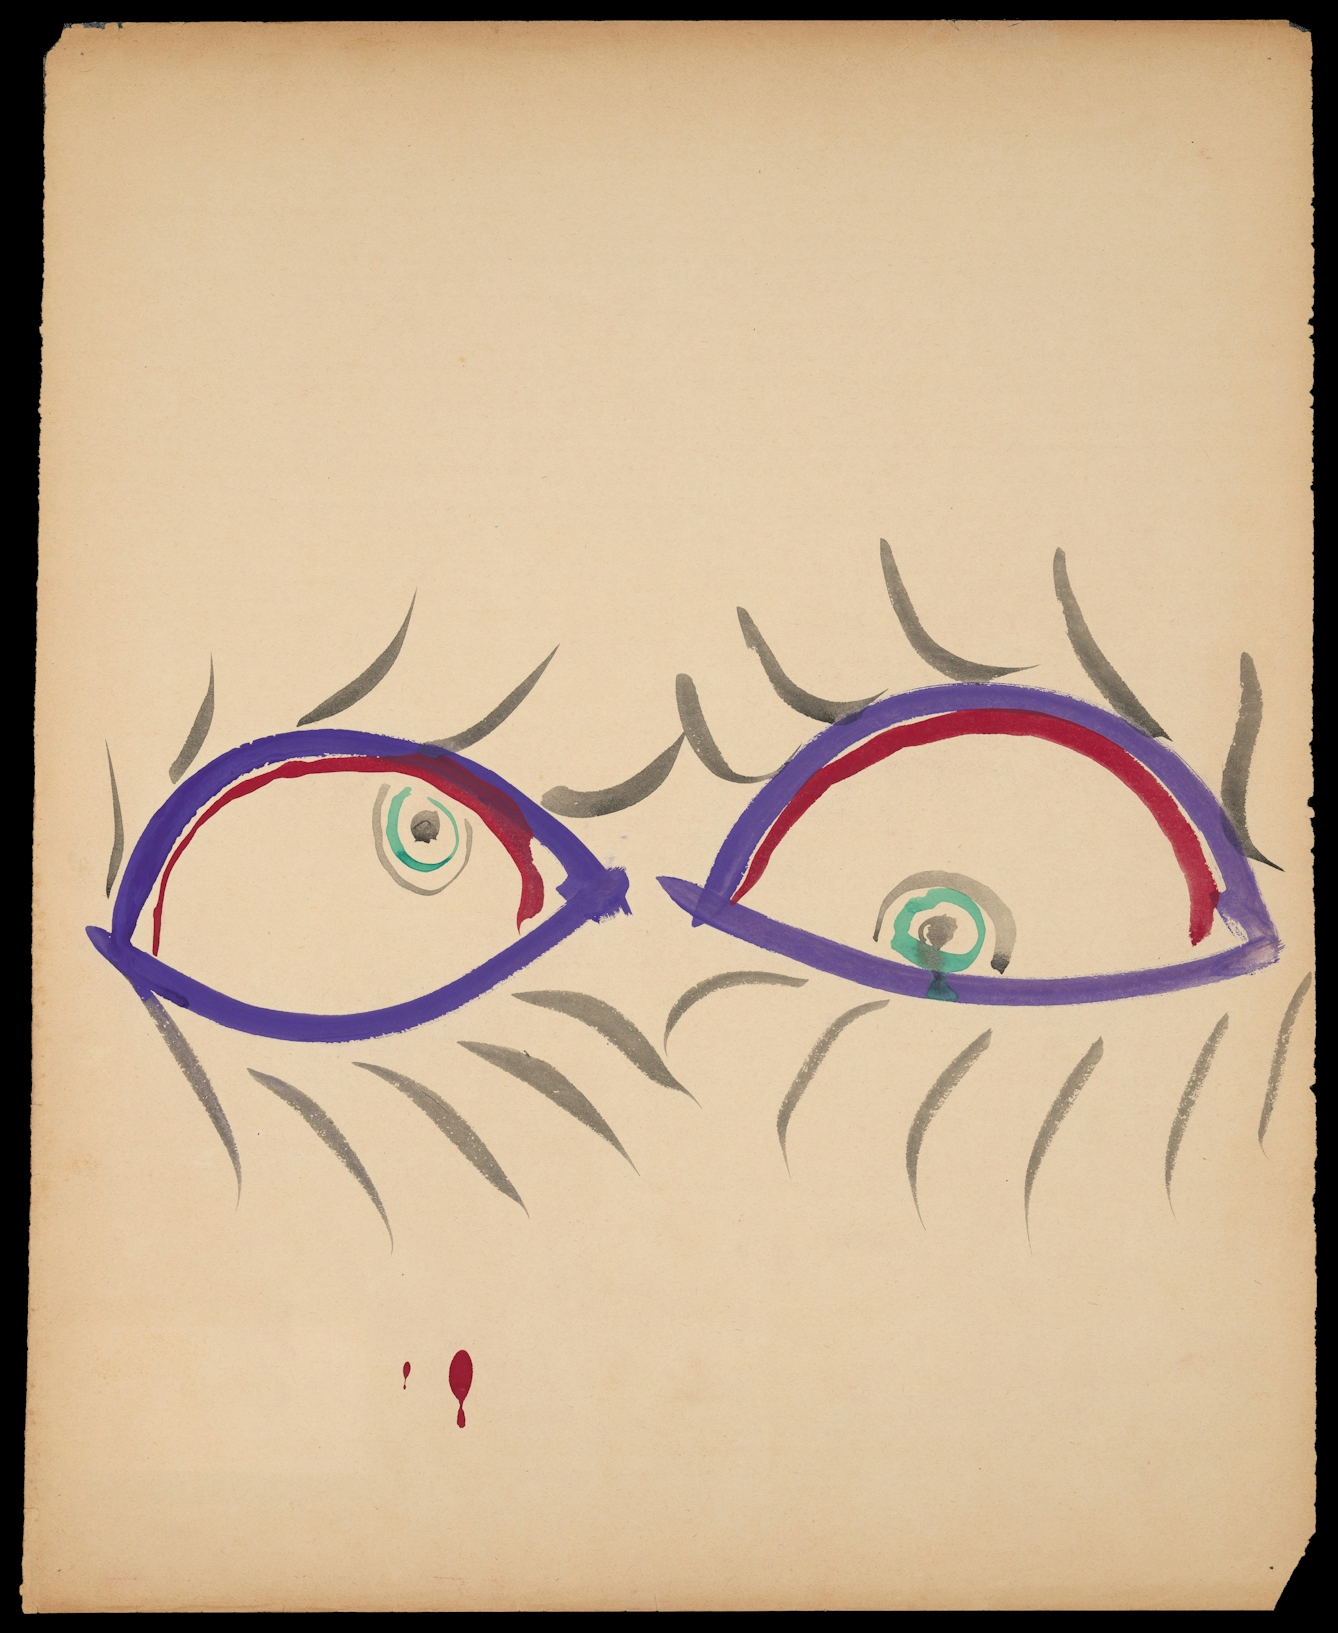 Photograph of a watercolour artwork showing an abstract outline drawing in purples, greys and reds, in the centre of an otherwise empty sheet of paper. The image seems to show a pair of eyes with large eyelashes. The pupils in each are not symmetrical, with the left eye looking up and to the right, and the right eye looking down and to the left.